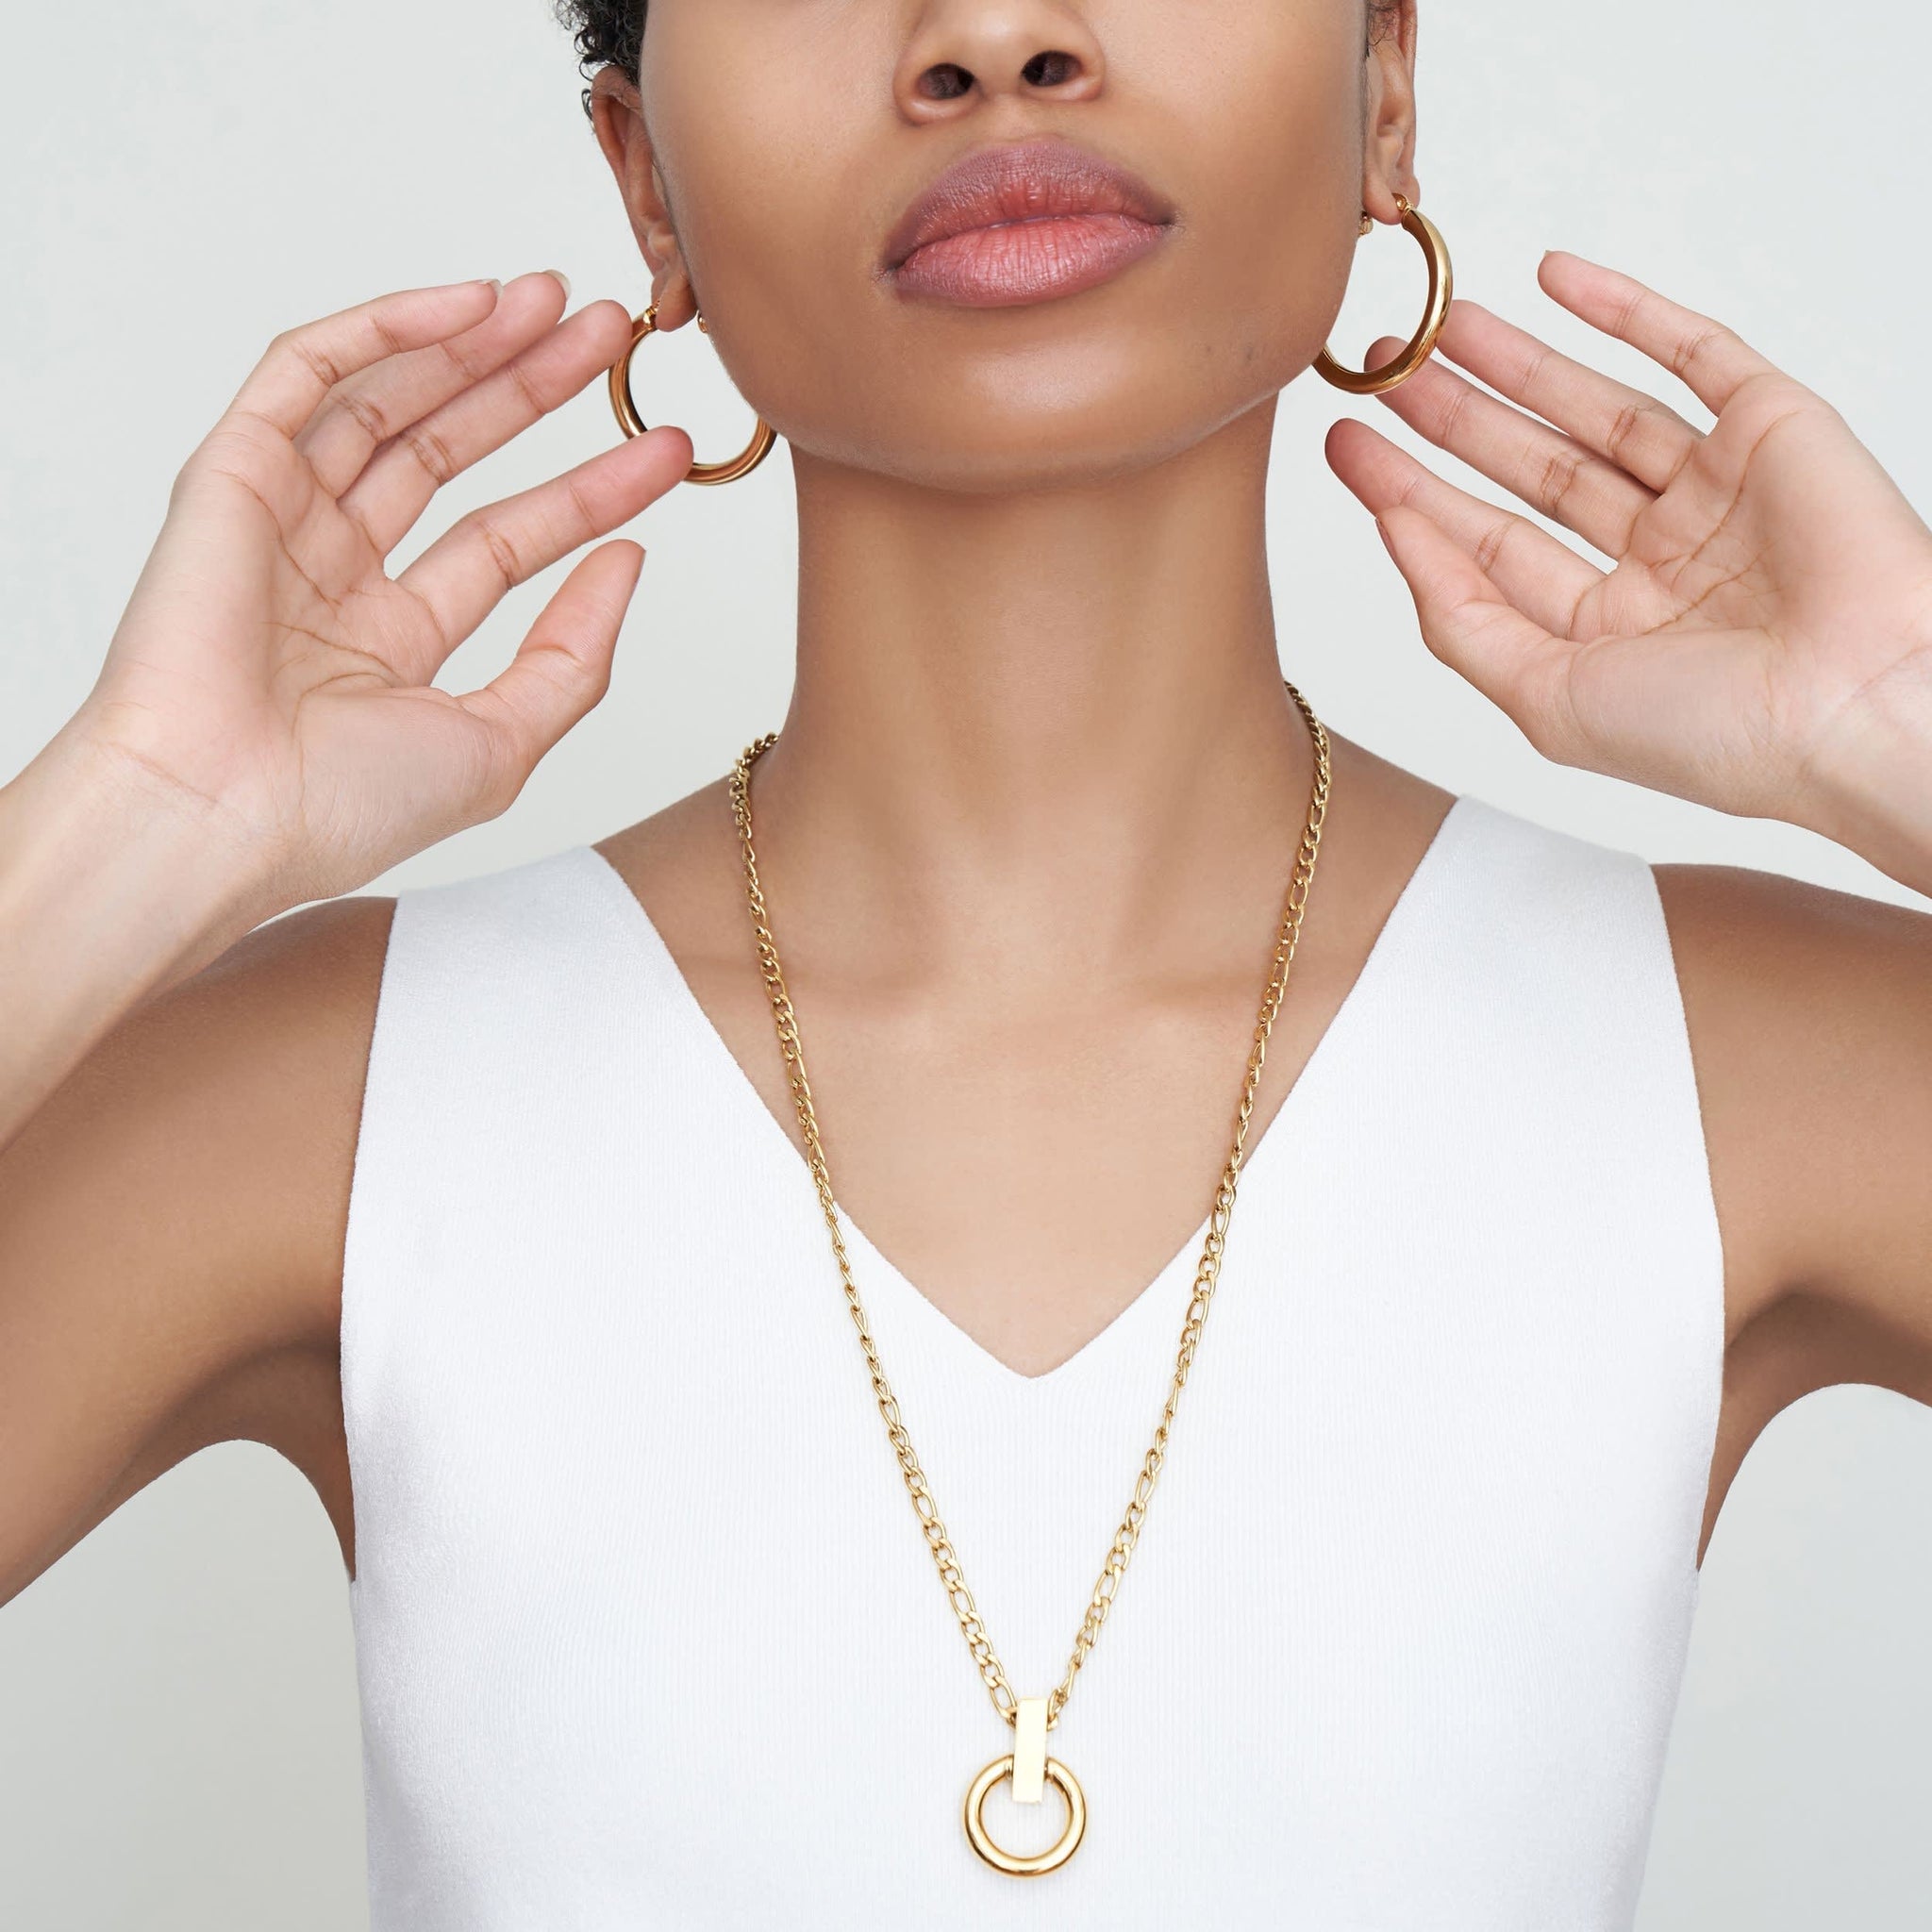 Detail image of a woman standing wearing the Claressa Earrings—Medium in Gold